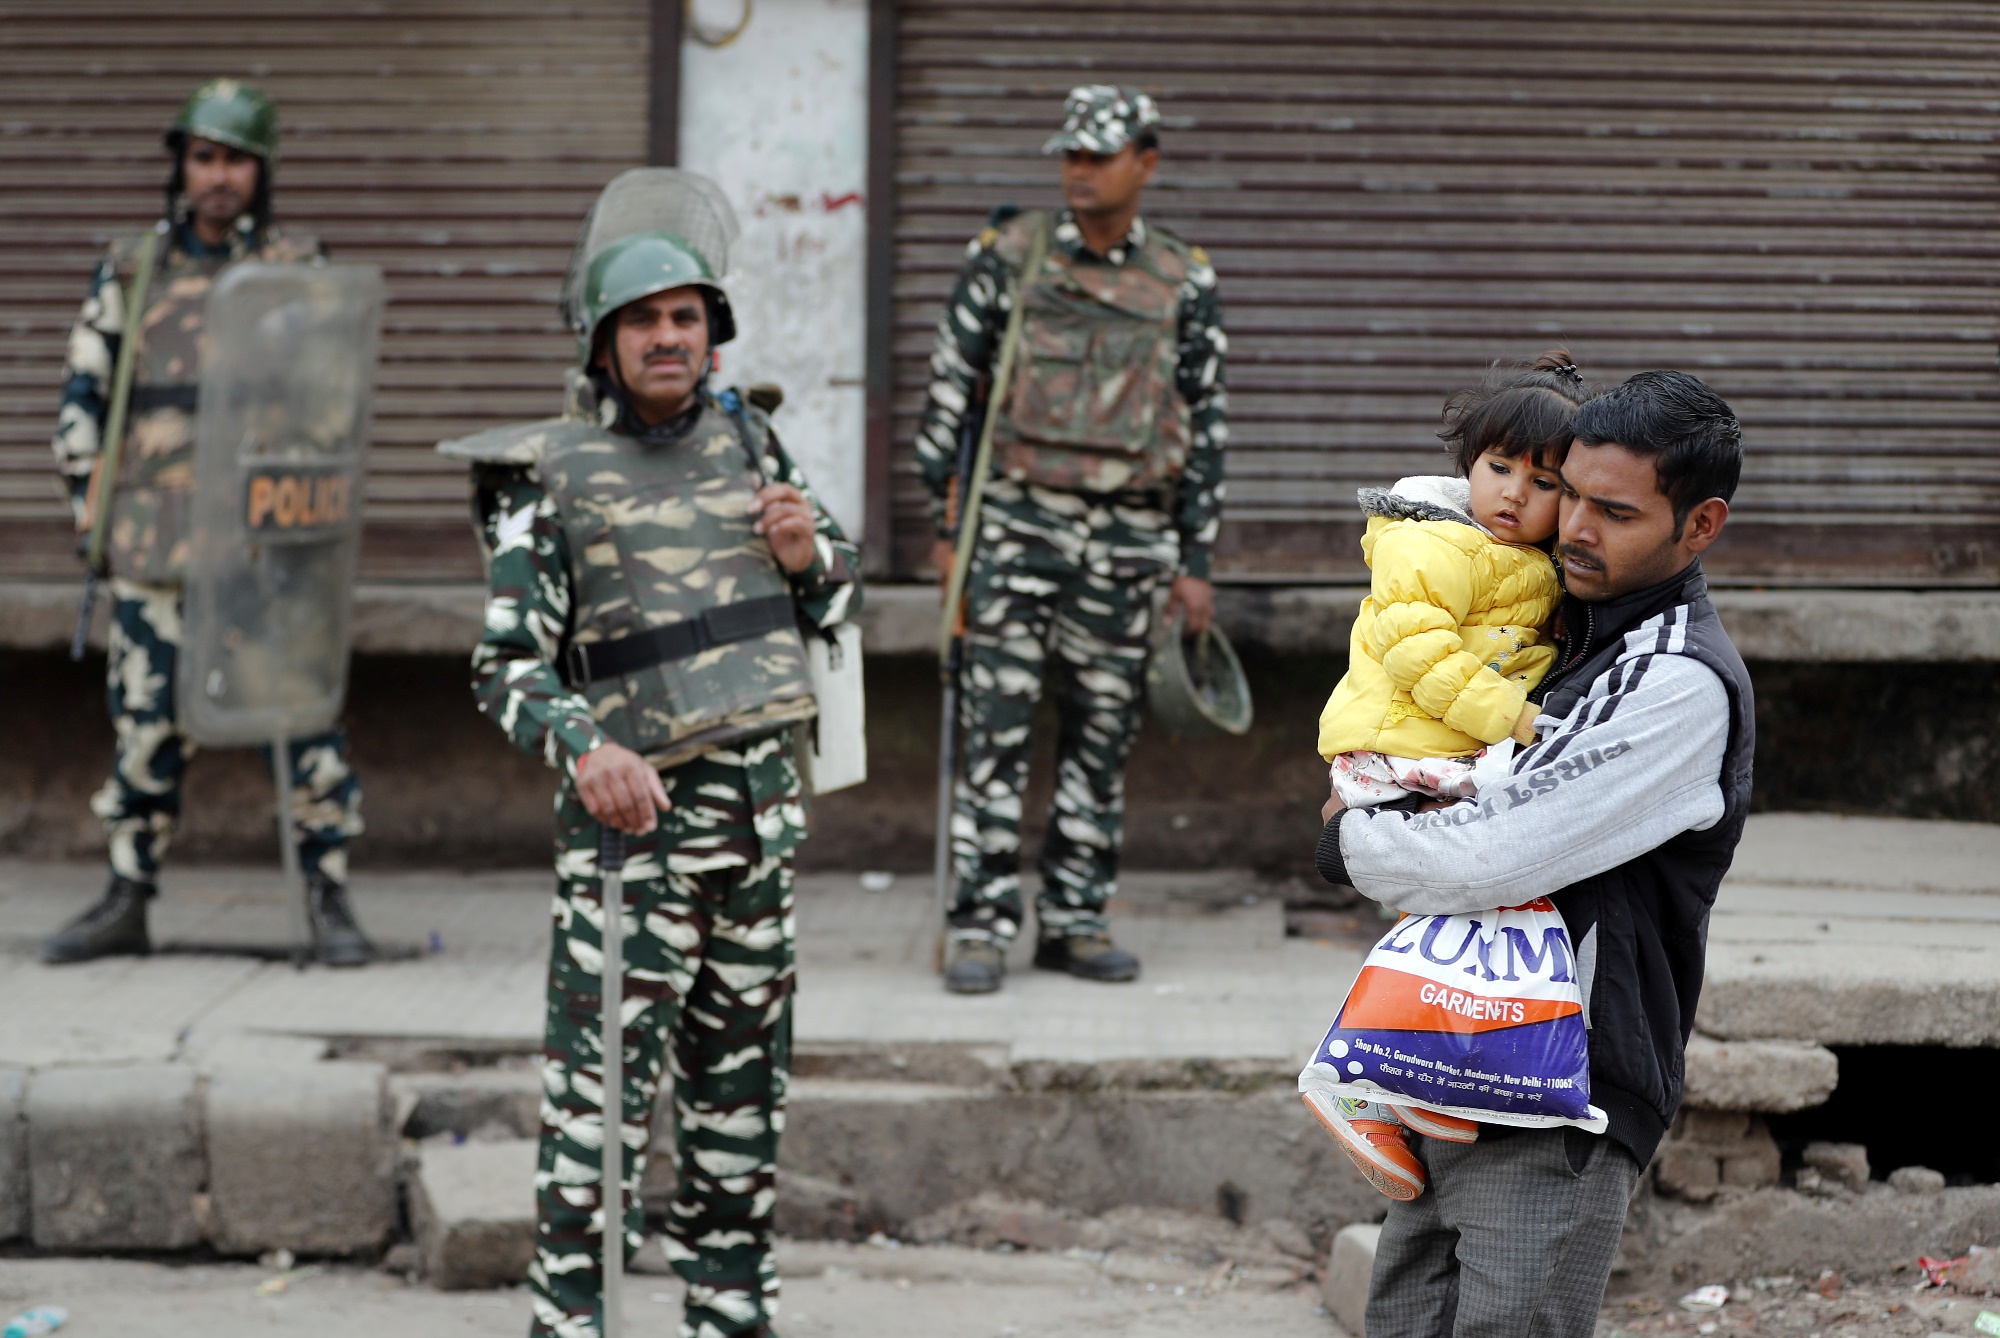 A man carrying a child walks past security forces in a riot affected area following clashes between people demonstrating for and against a new citizenship law in New Delhi, February 27, 2020. REUTERS/Adnan Abidi